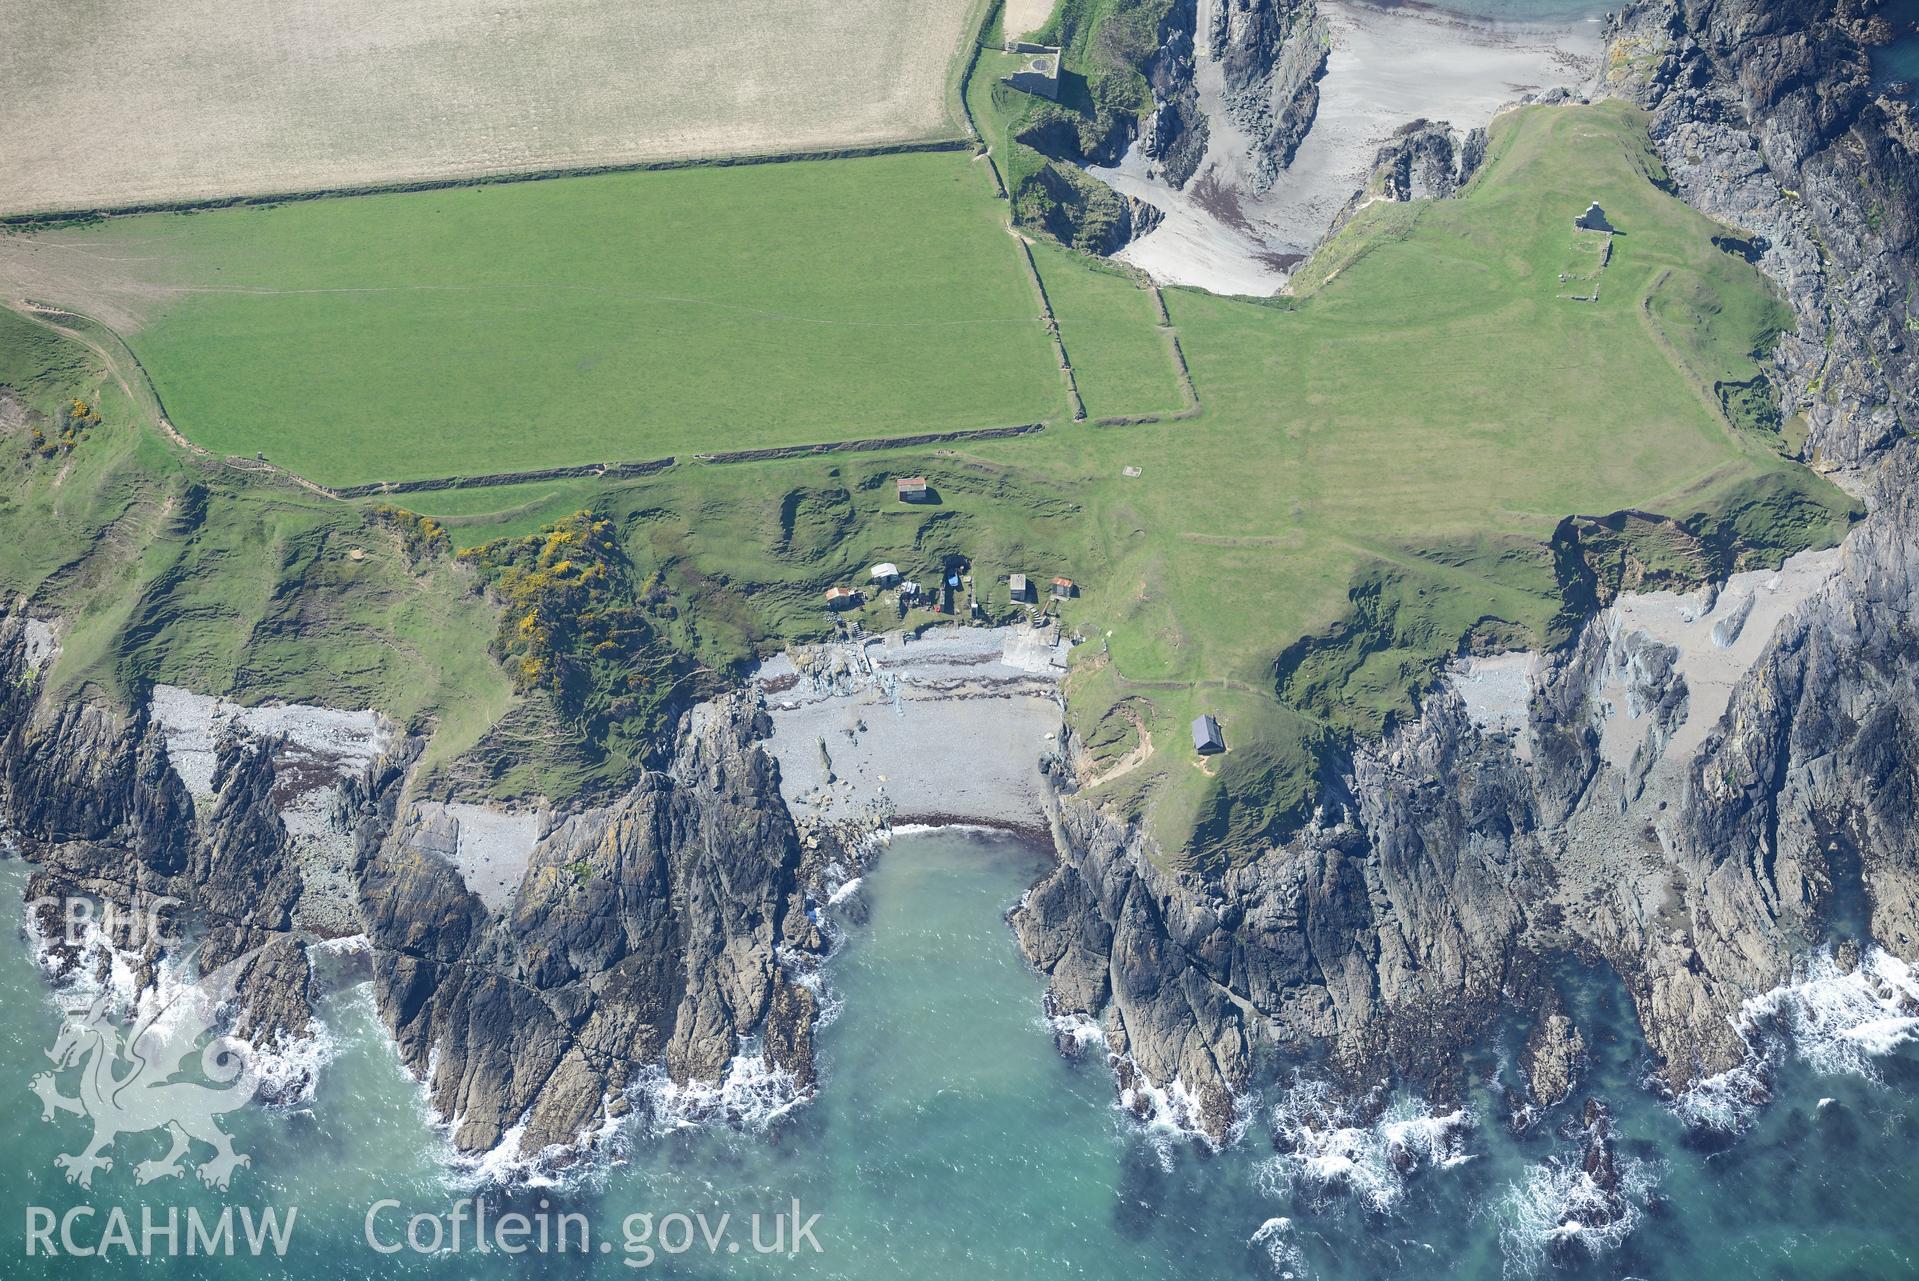 Aerial photography of Porth Ysgaden taken on 3rd May 2017.  Baseline aerial reconnaissance survey for the CHERISH Project. ? Crown: CHERISH PROJECT 2017. Produced with EU funds through the Ireland Wales Co-operation Programme 2014-2020. All material made